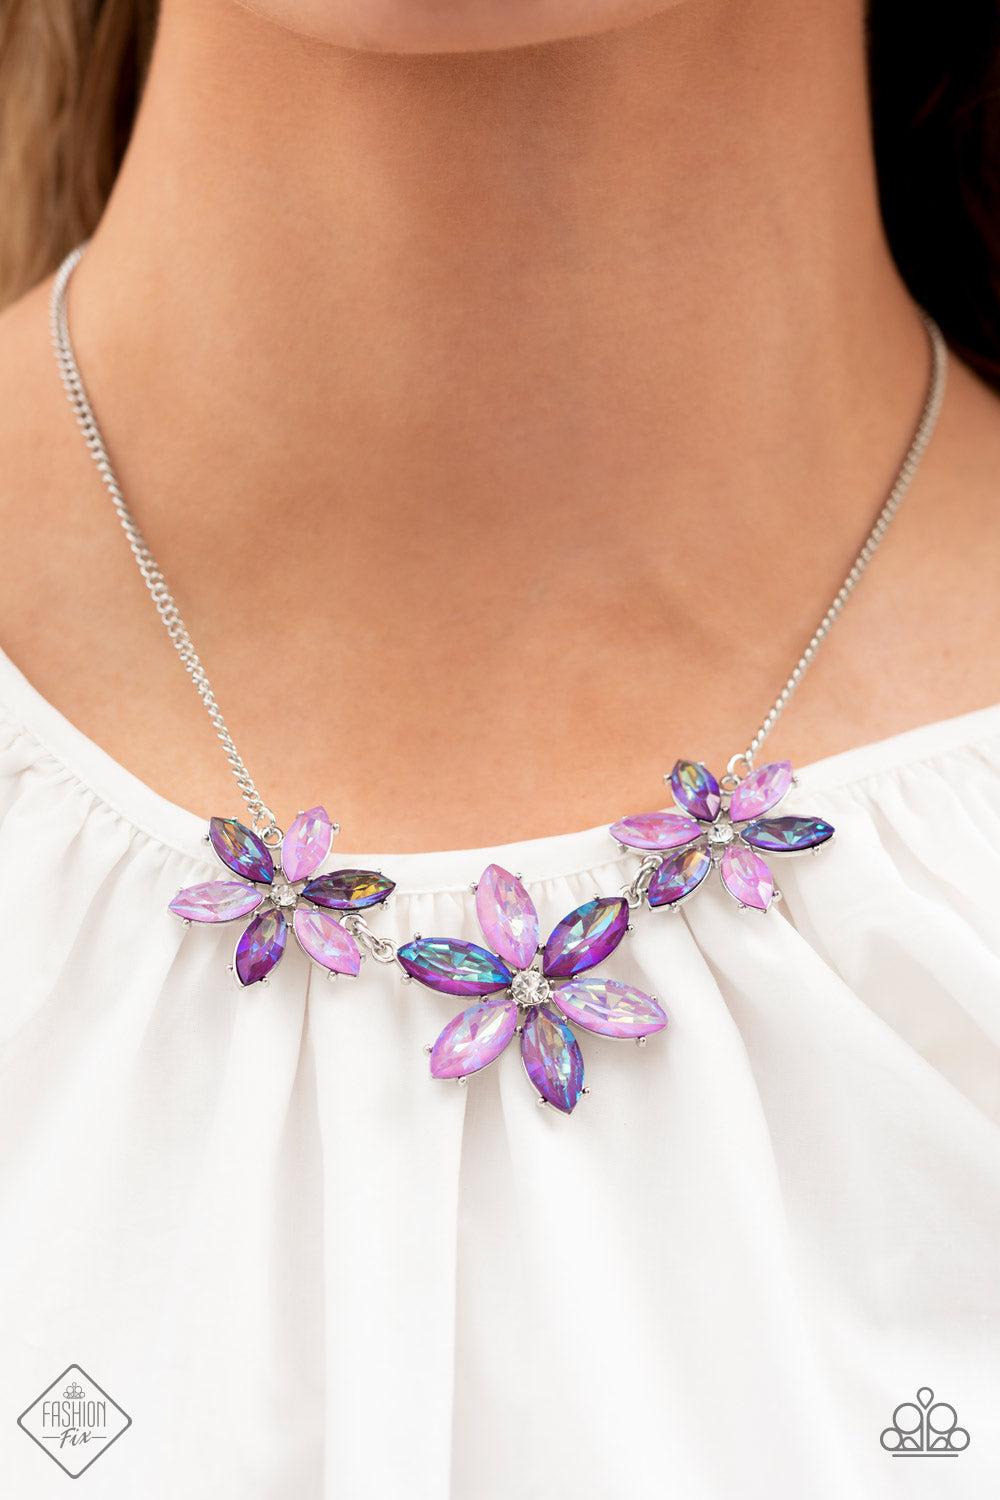 Meadow Muse Purple Rhinestone Flower Necklace - Paparazzi Accessories-on model - CarasShop.com - $5 Jewelry by Cara Jewels